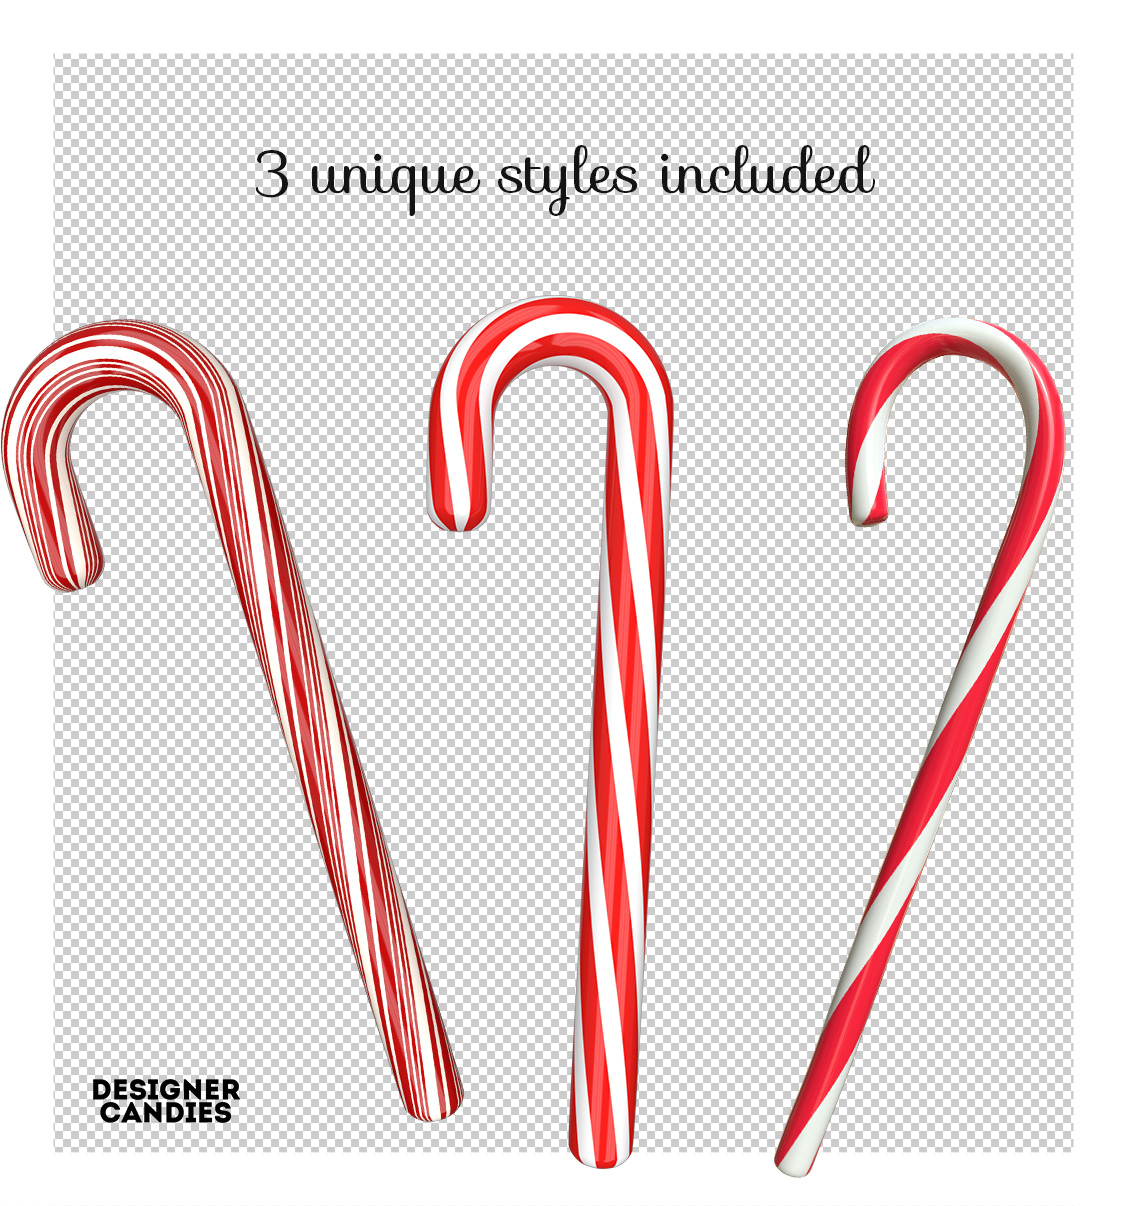 Candy Cane Renders in PNG Format